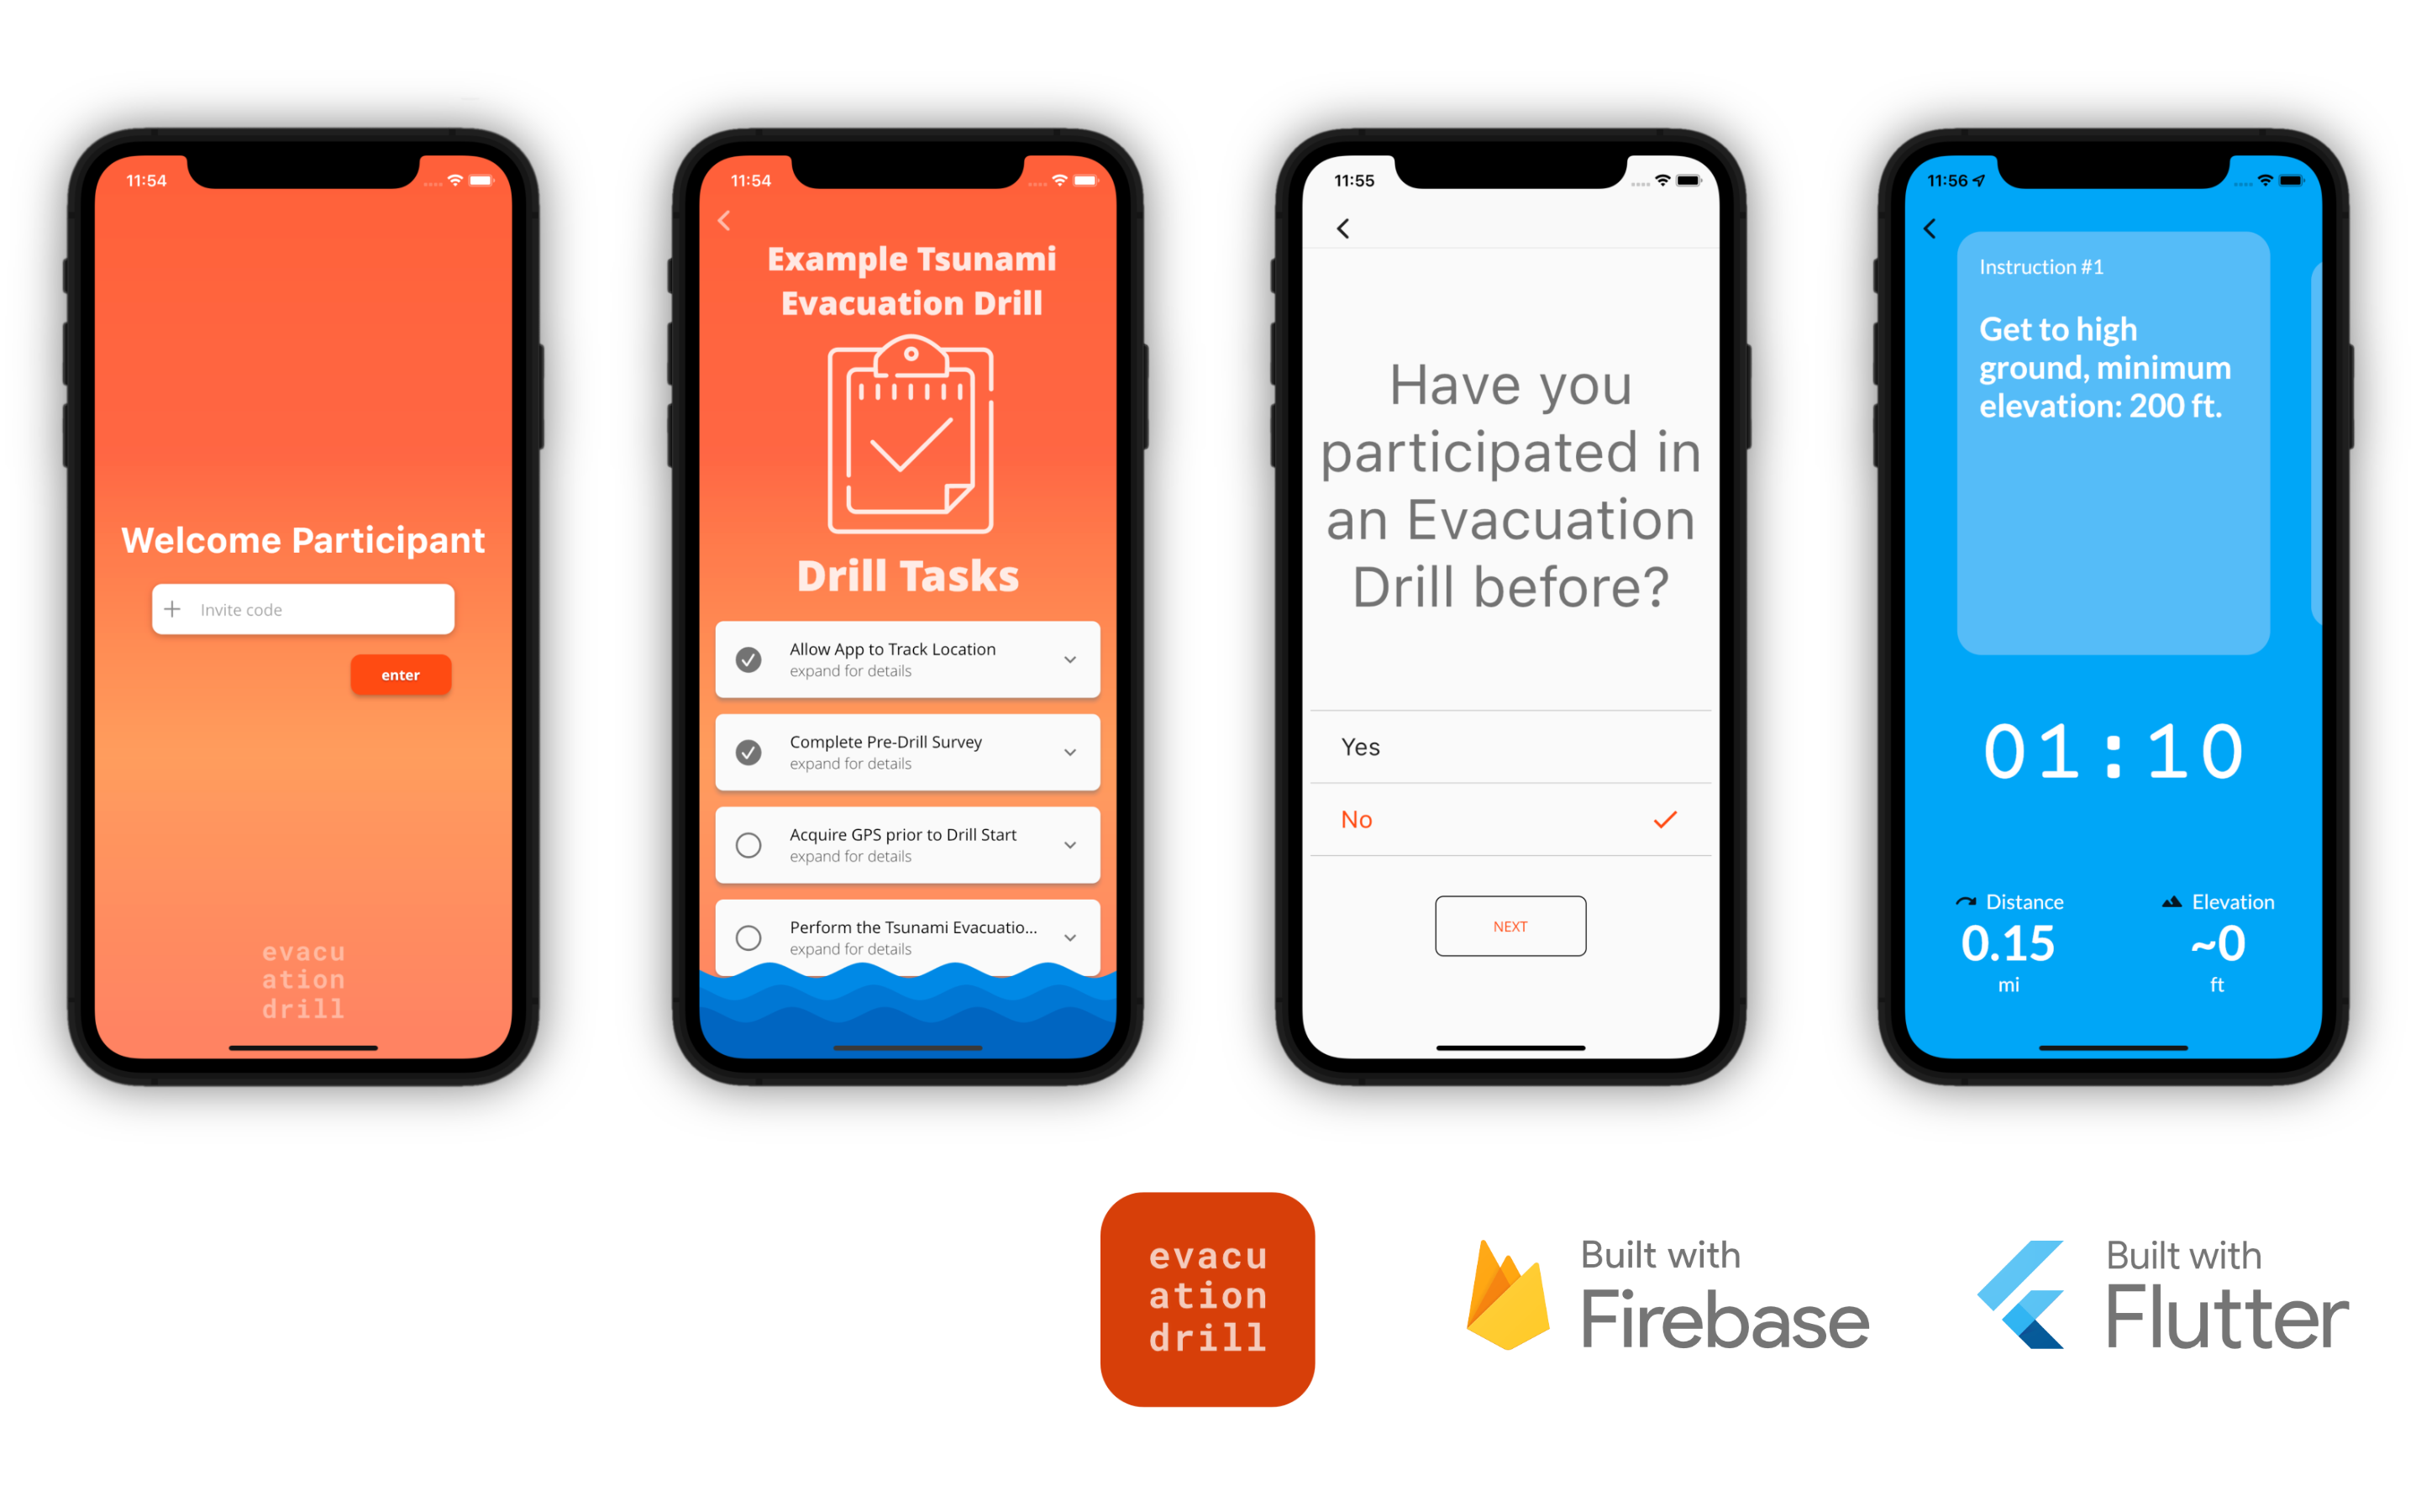 Four screenshots of the Evacuation Drill Mobile App, along with branding for Flutter and Firebase which the app was built with, and finally the App Icon.